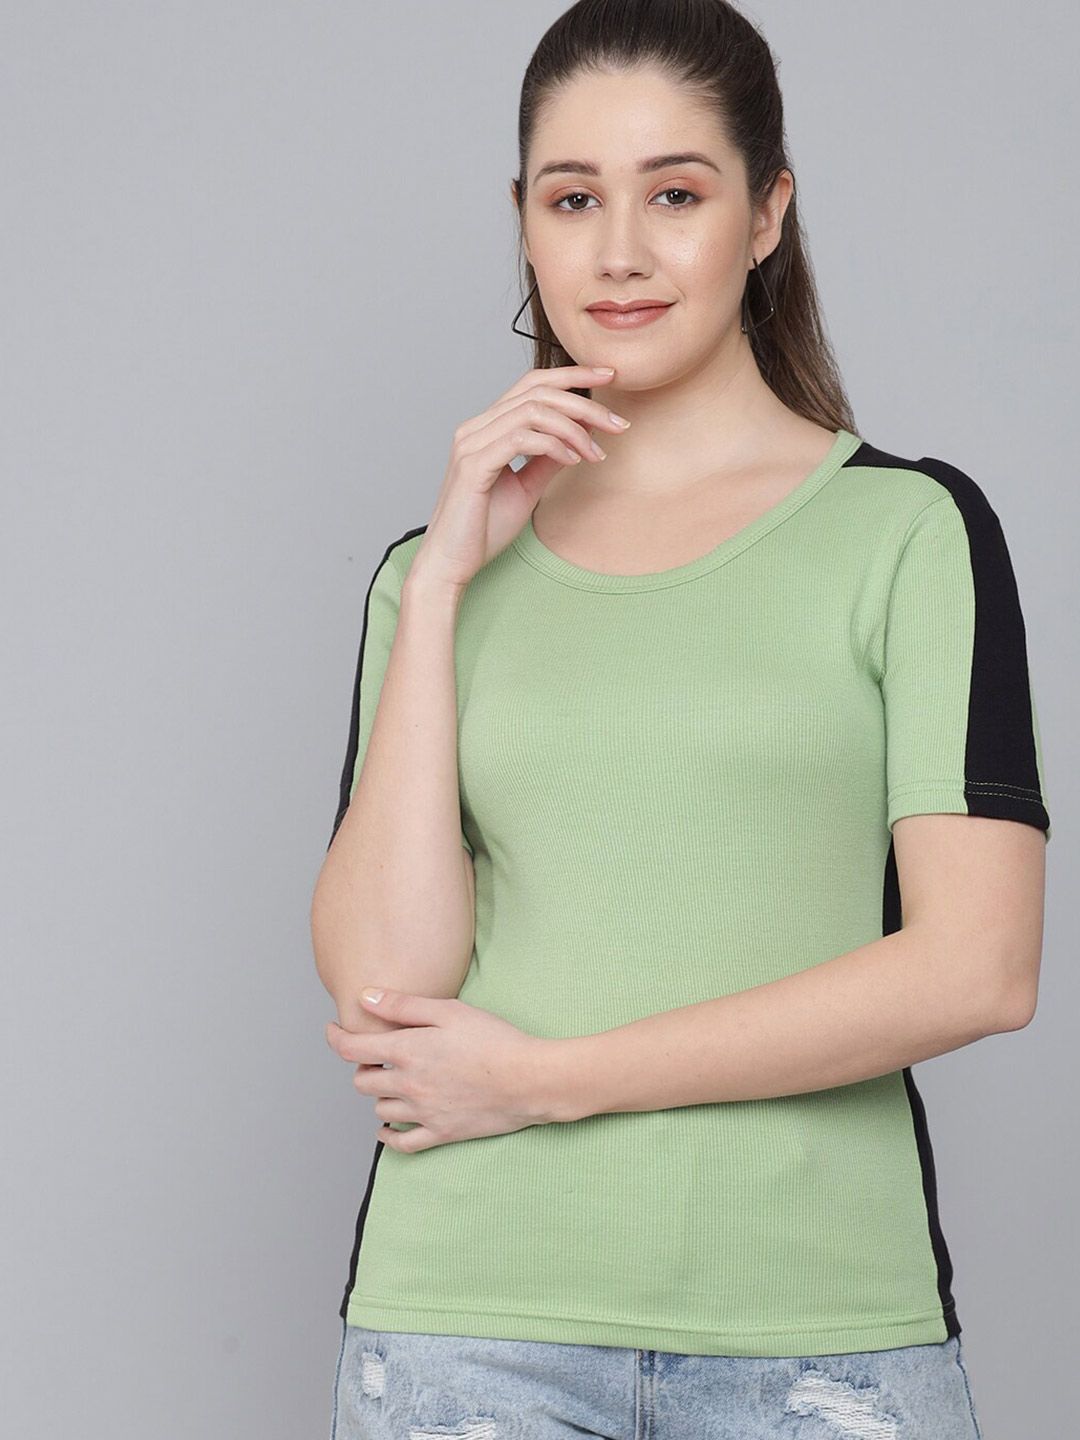 Q-rious Green Colourblocked Top Price in India